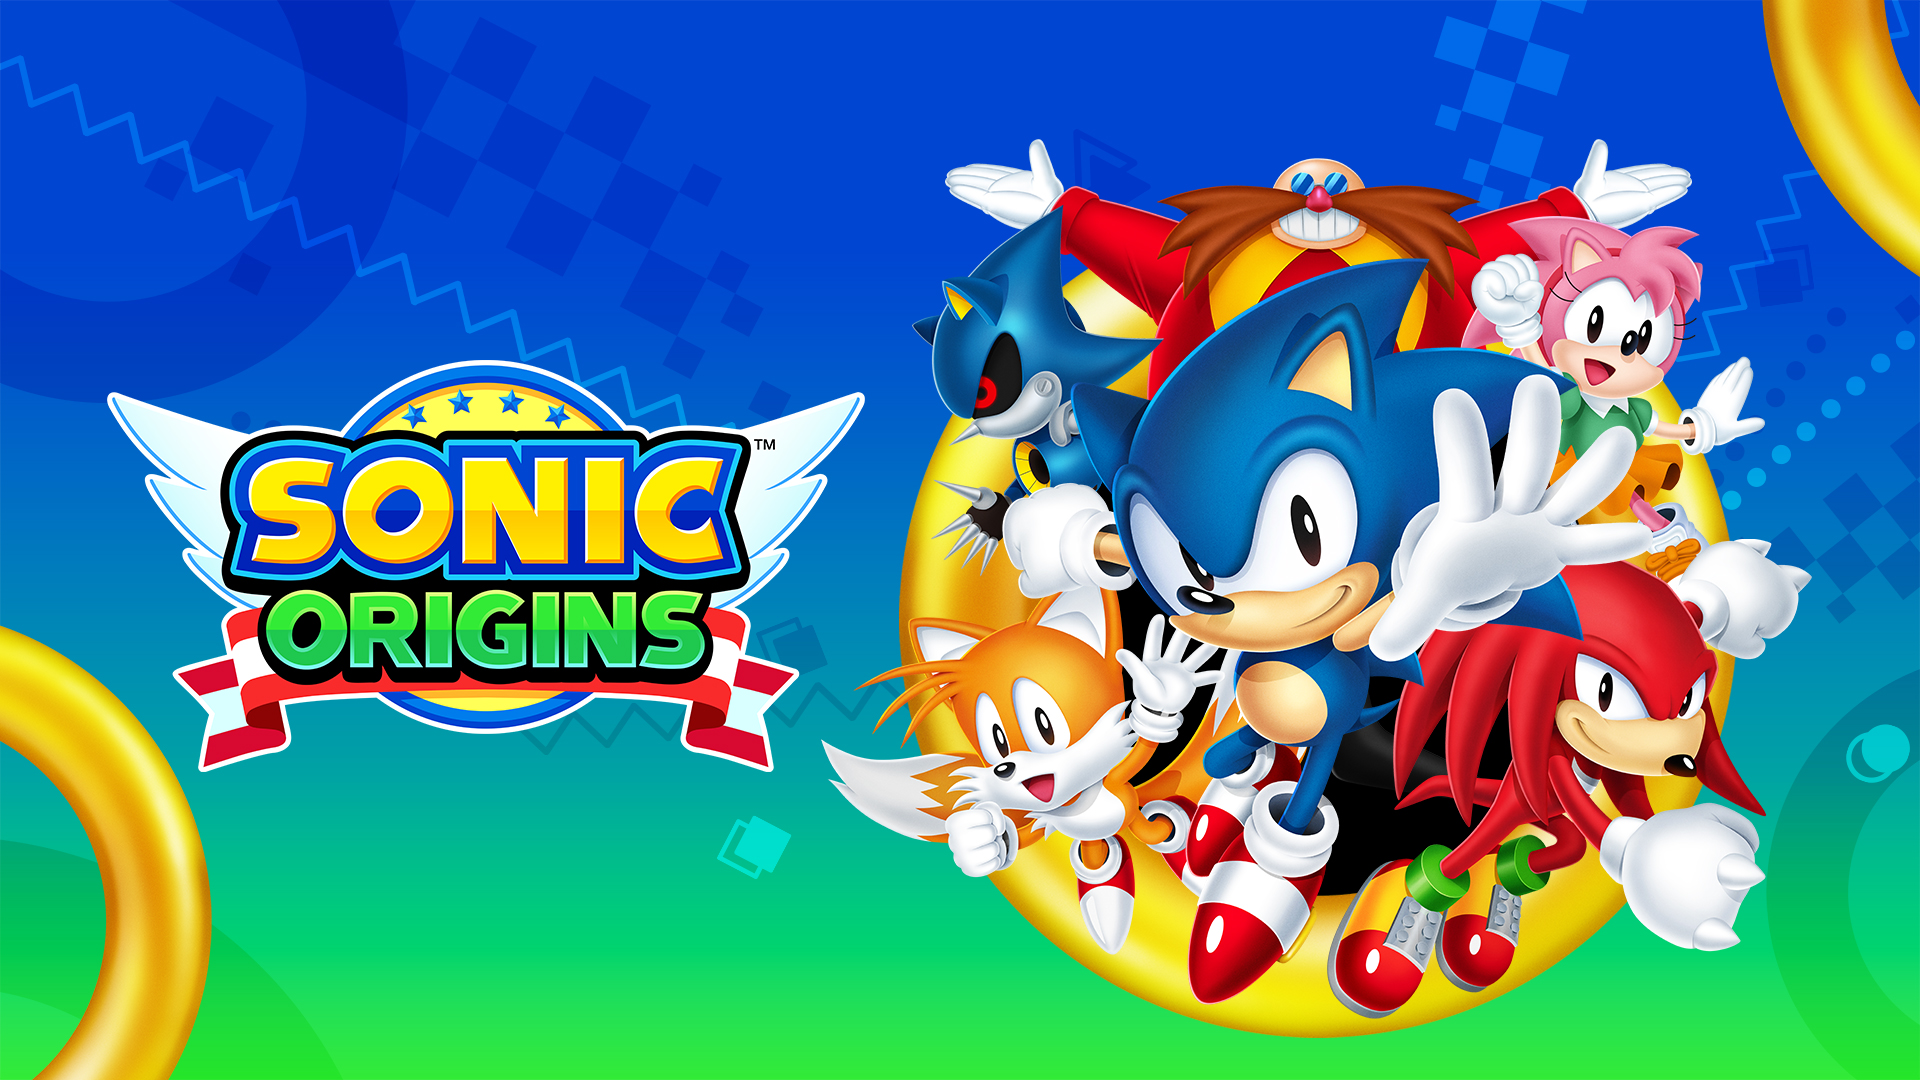 Sonic Origins fully revealed, is yet another Sonic collection of games you probably already own